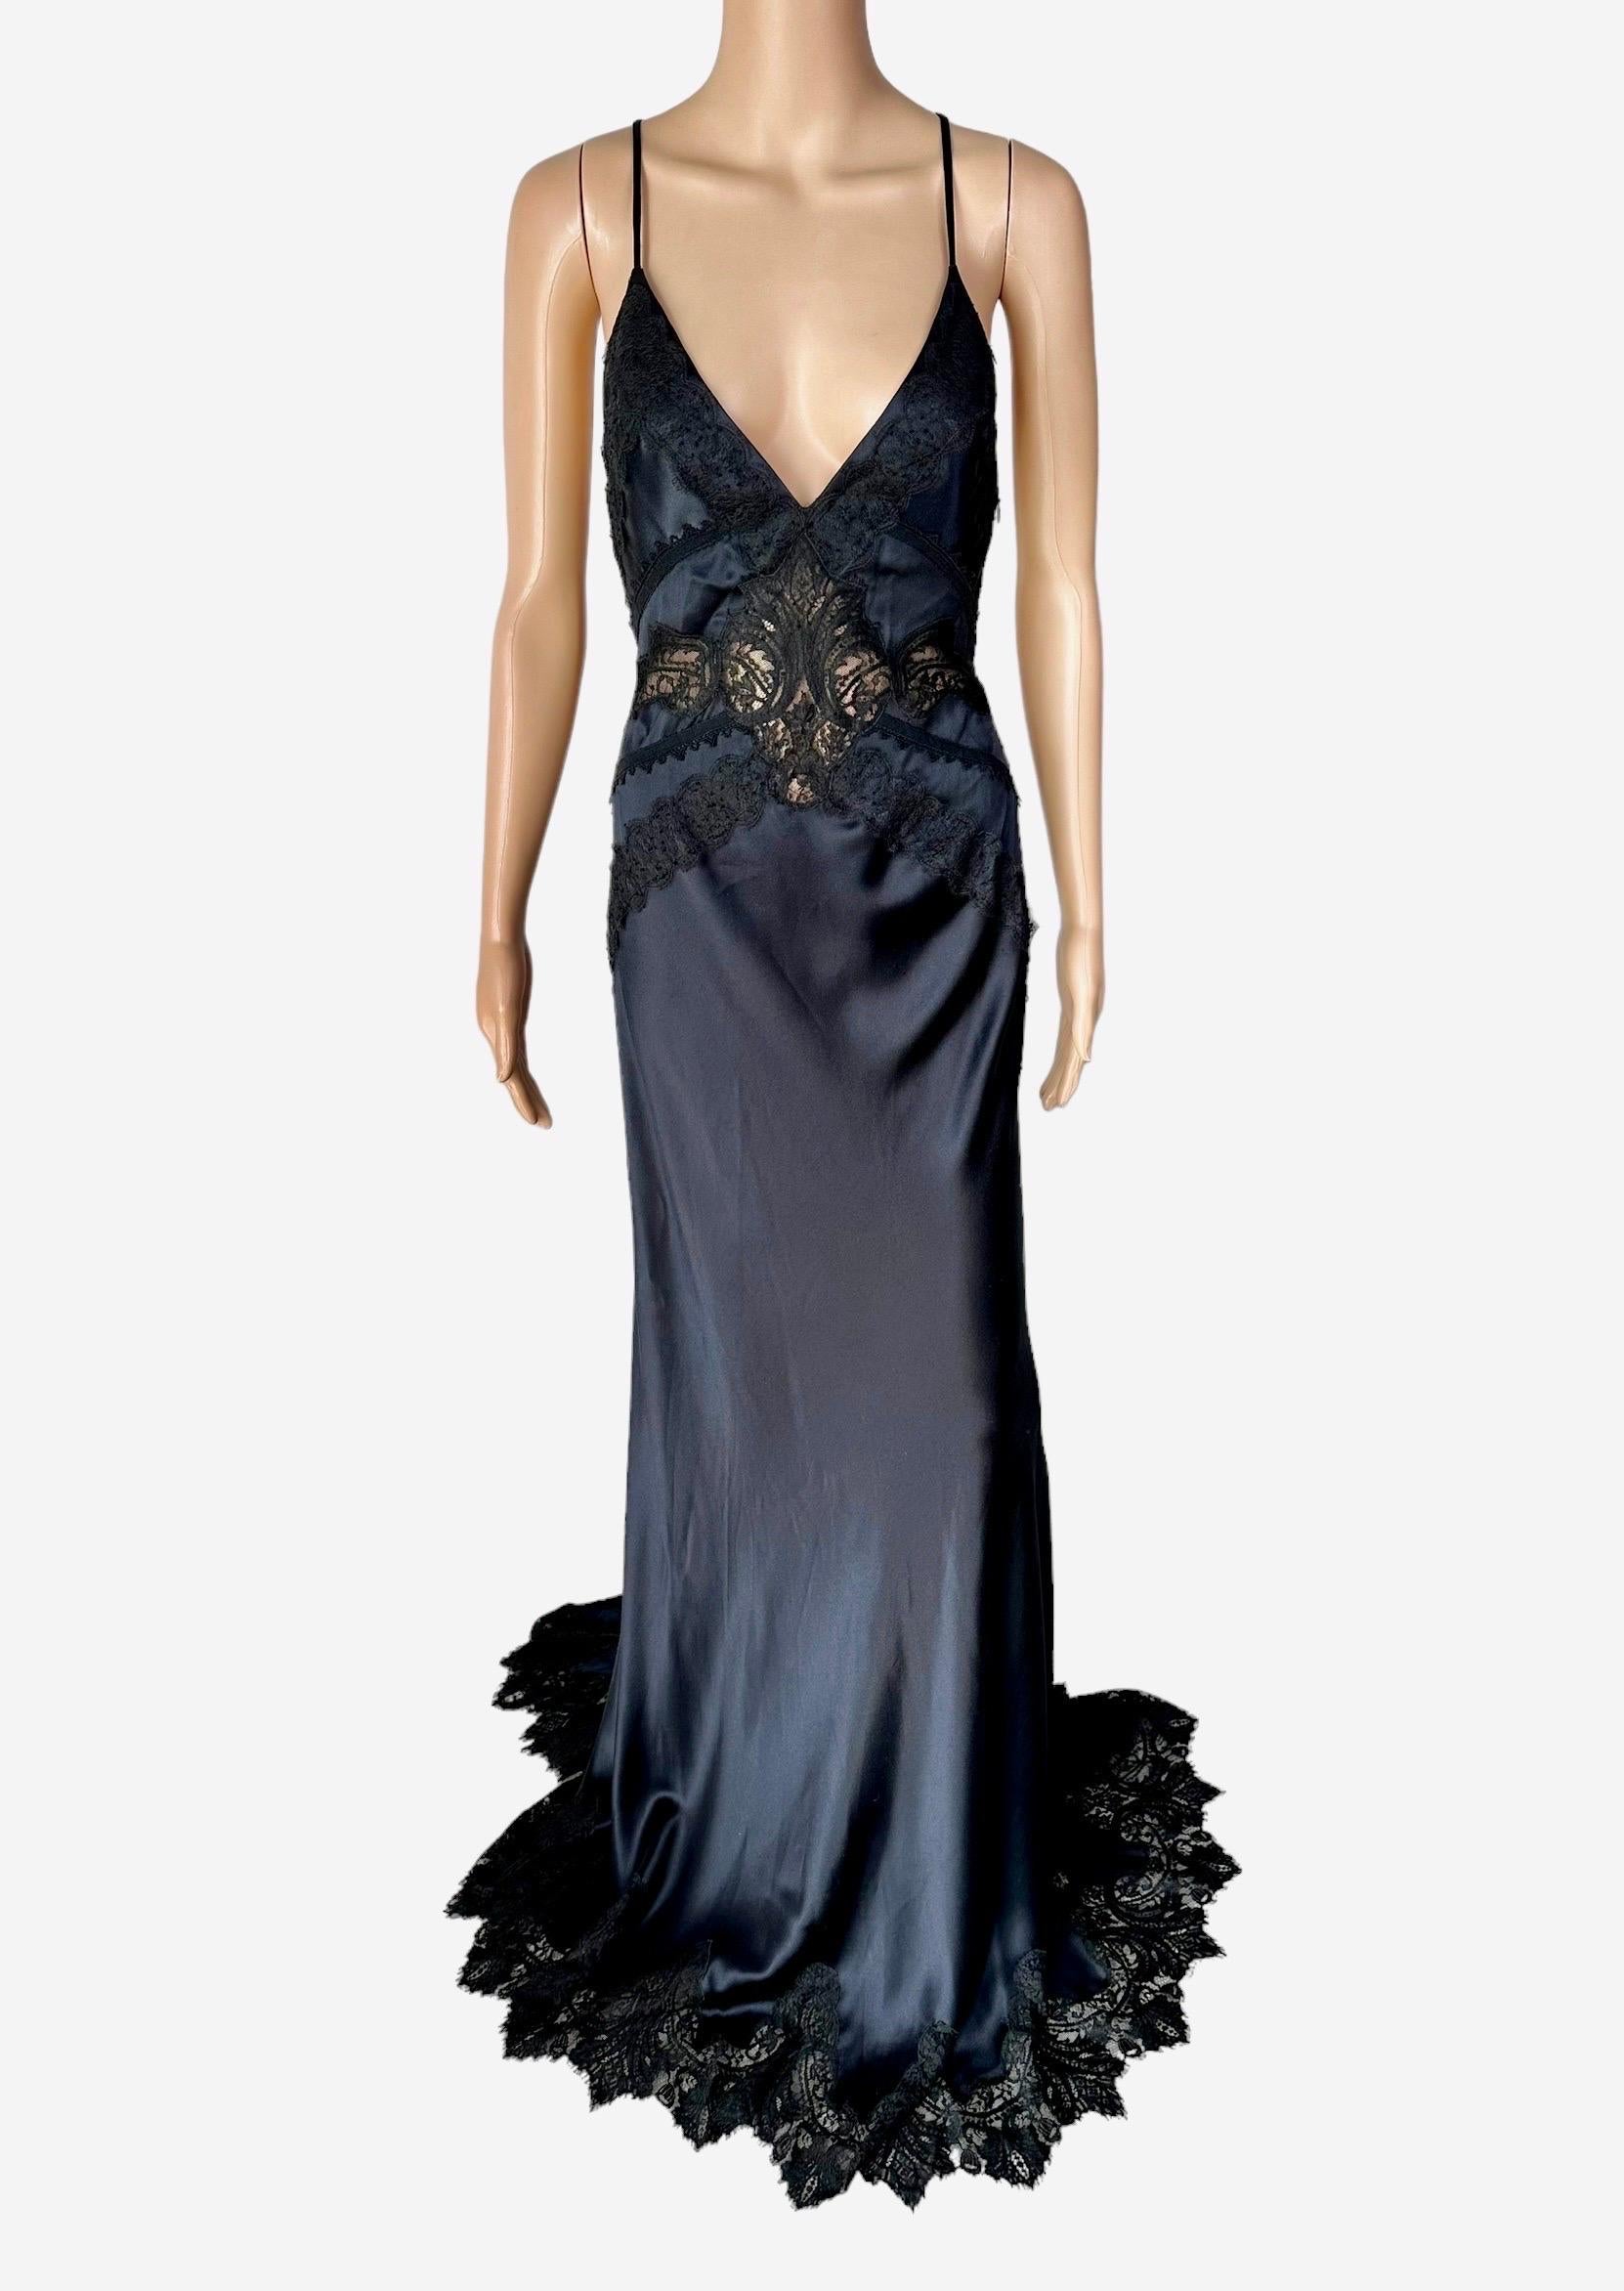 Versace c.2006 Plunging Neckline Sheer Lace Panels Backless Evening Dress Gown  For Sale 6